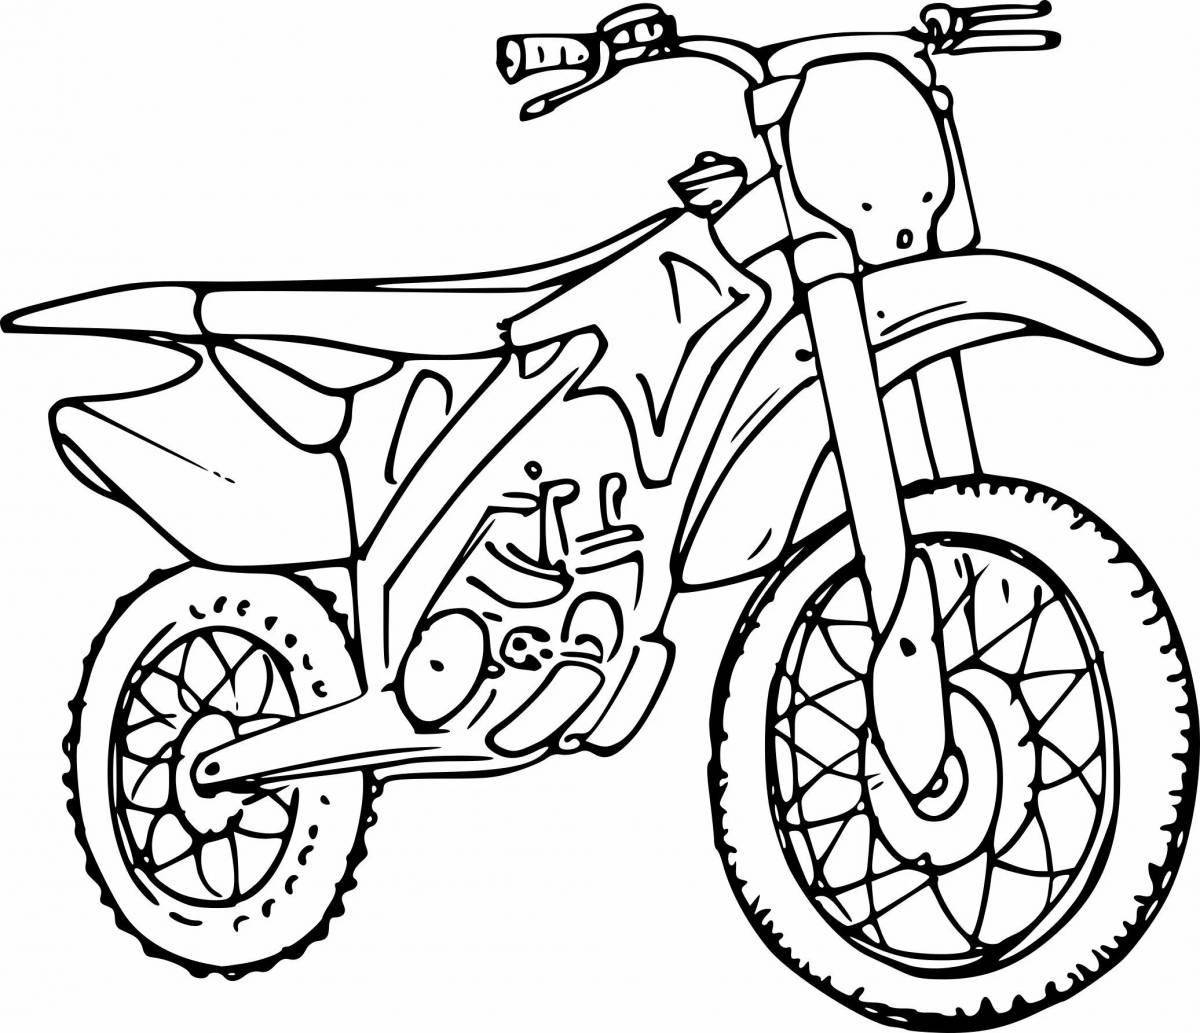 Outstanding motorcycles coloring book for 6-7 year olds